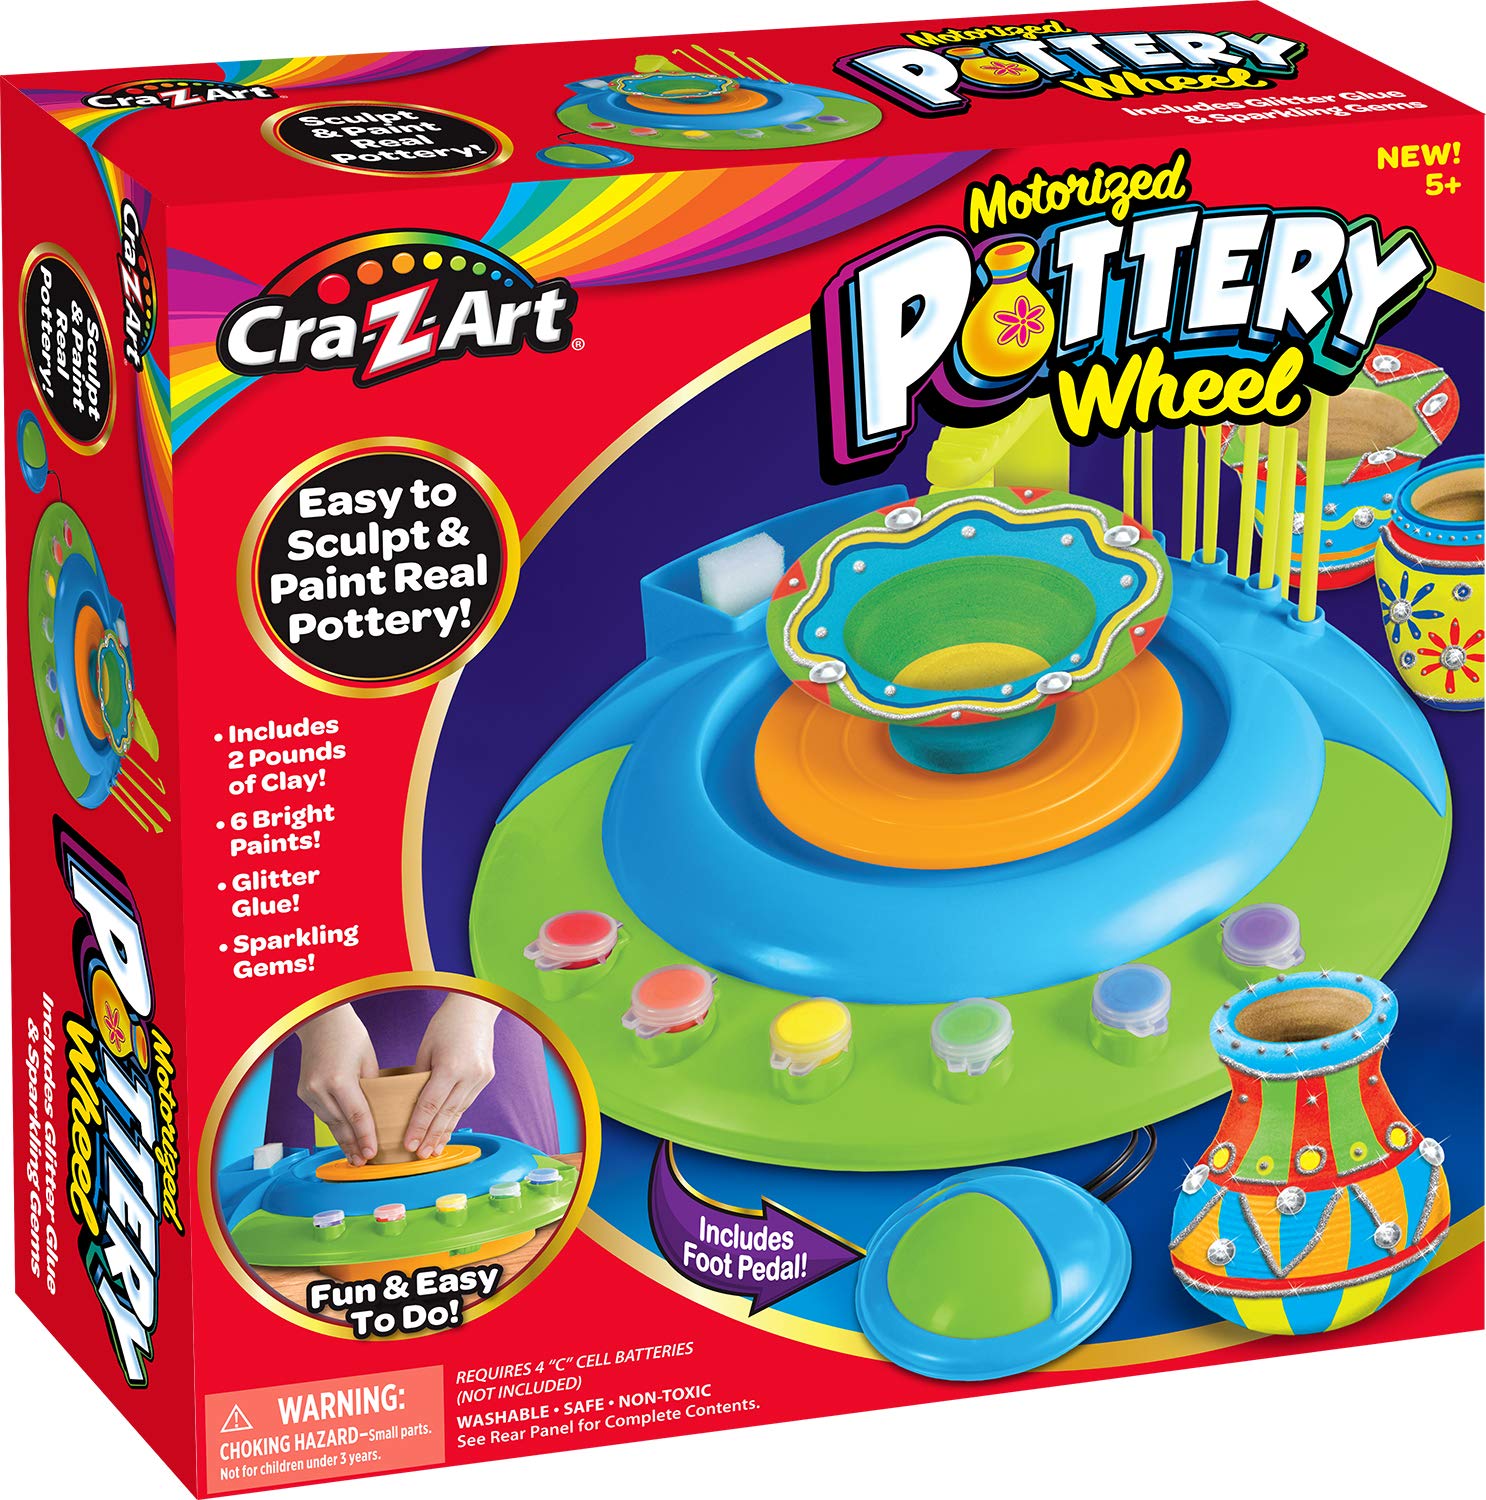 Top 7 Best Pottery Wheels for Kids Reviews in 2022 5